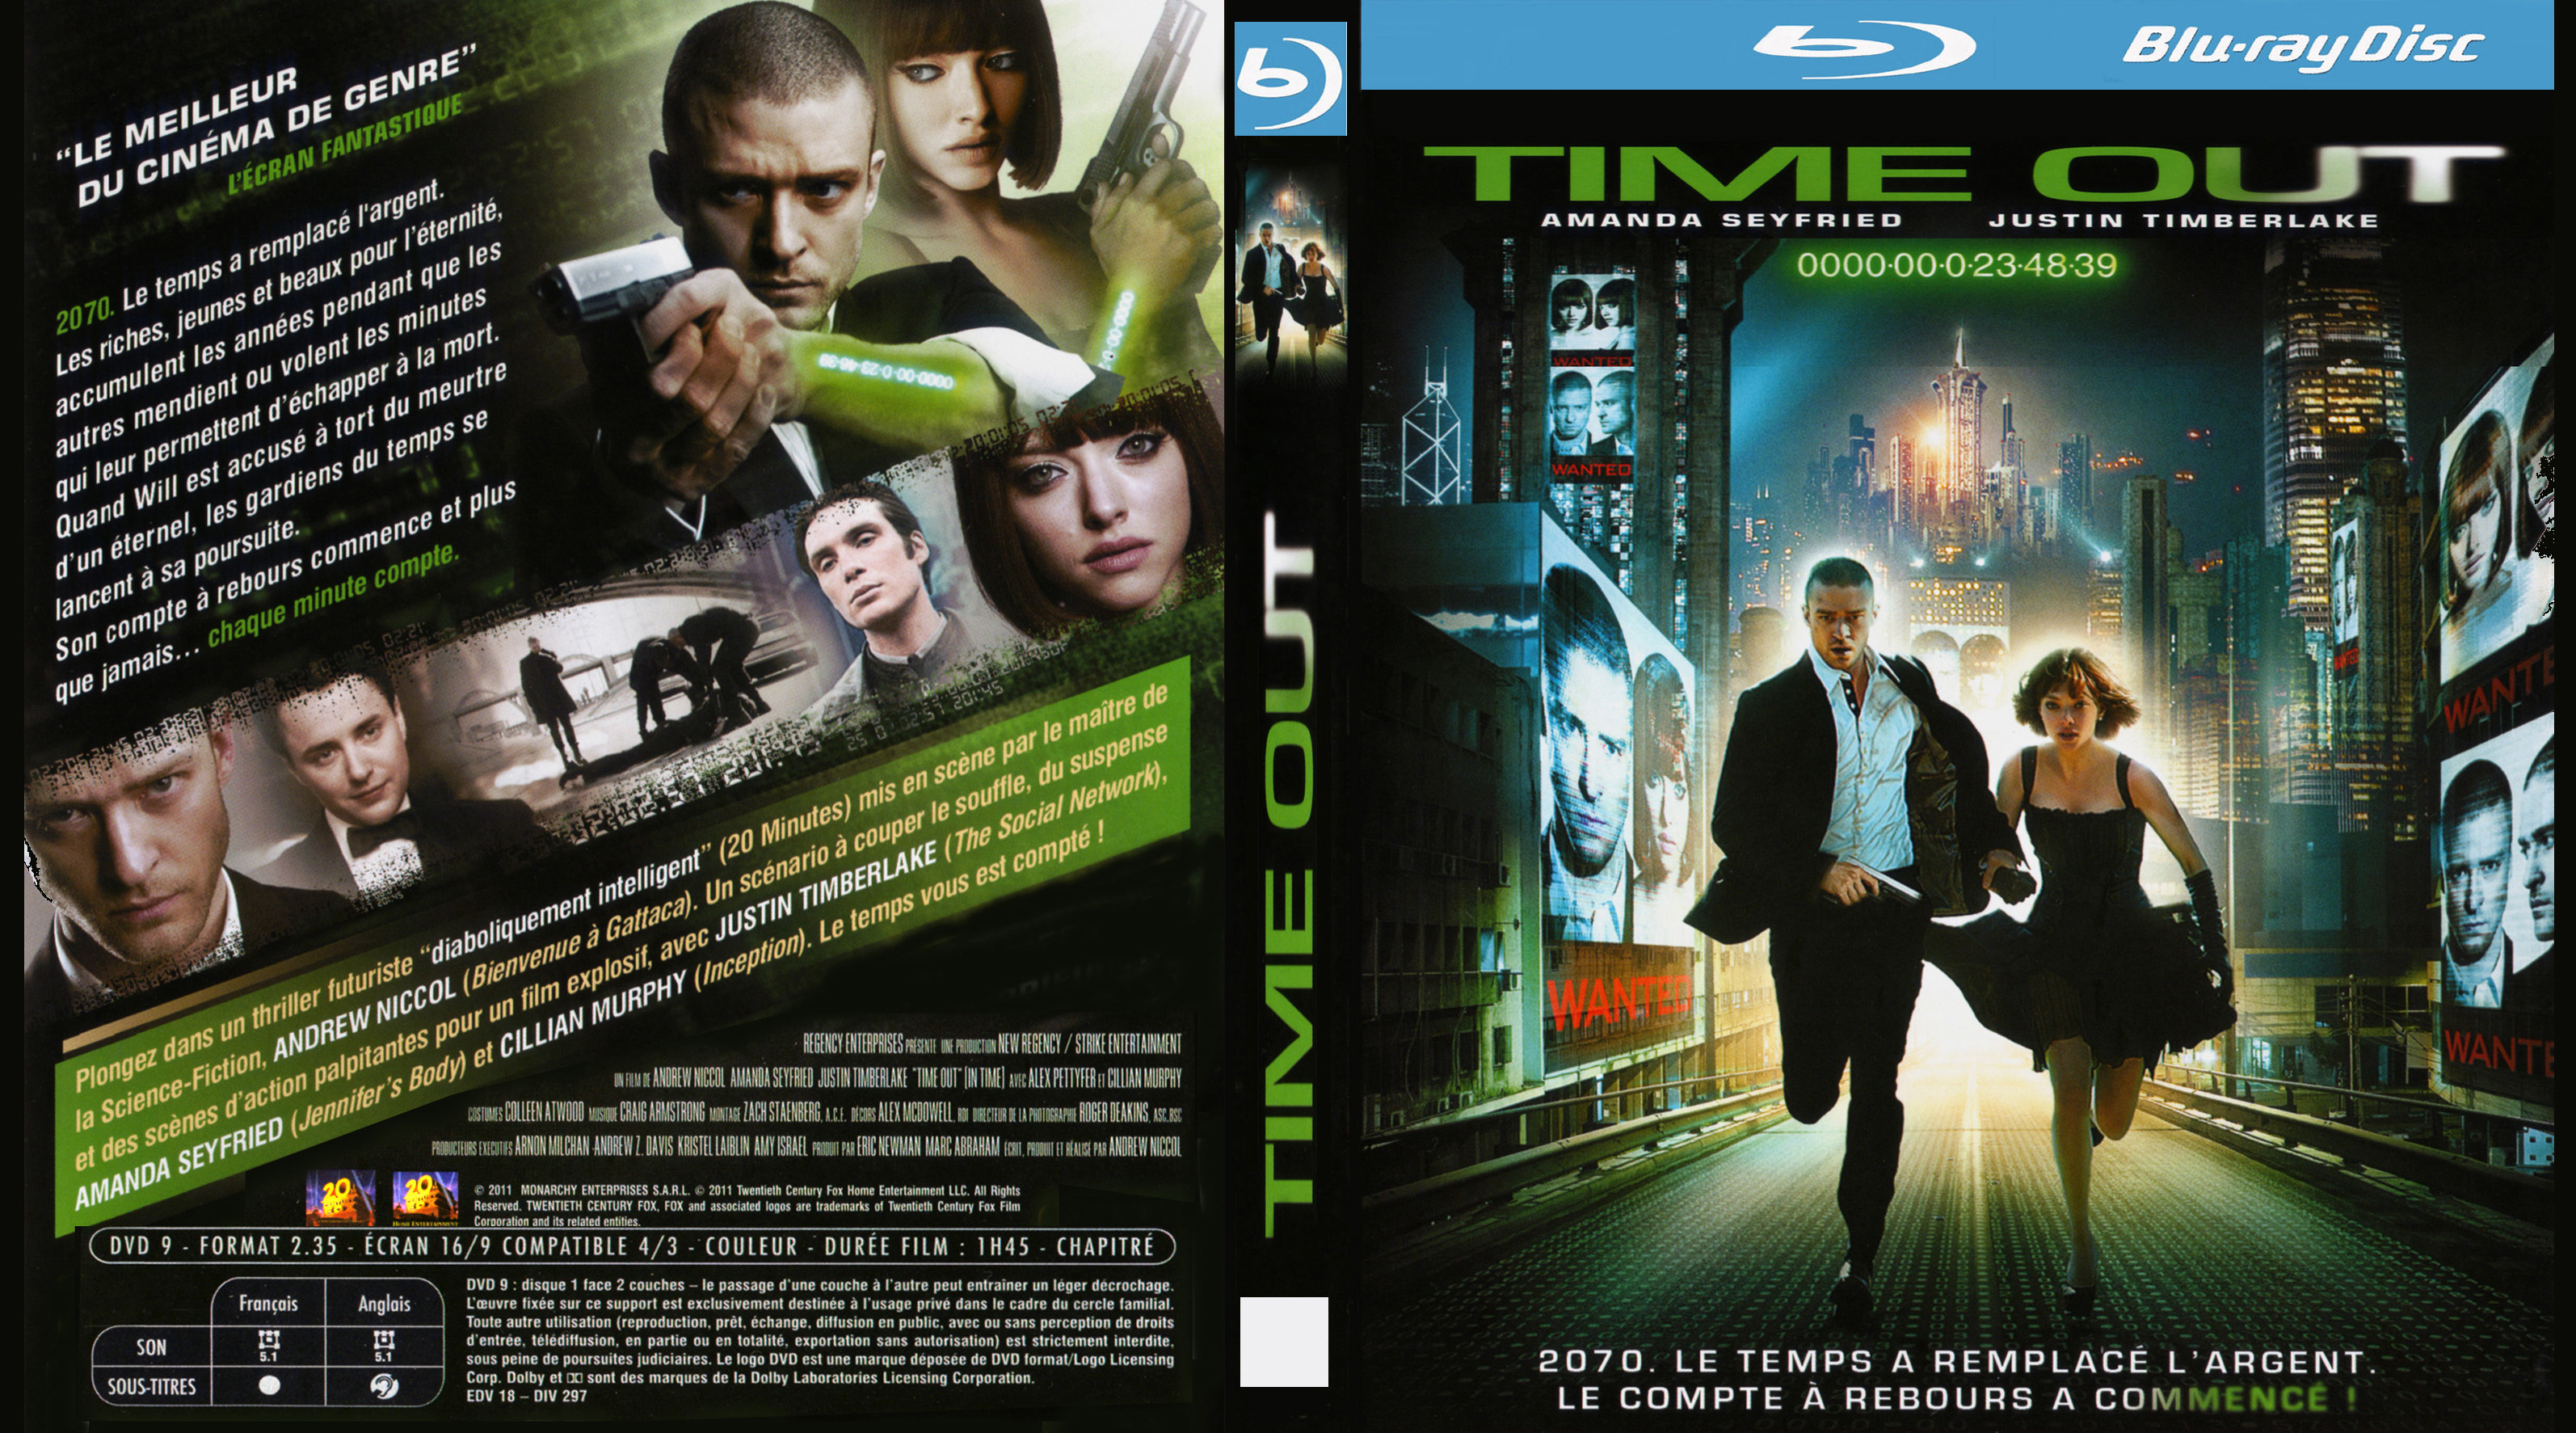 Jaquette DVD Time Out custom (BLU-RAY)